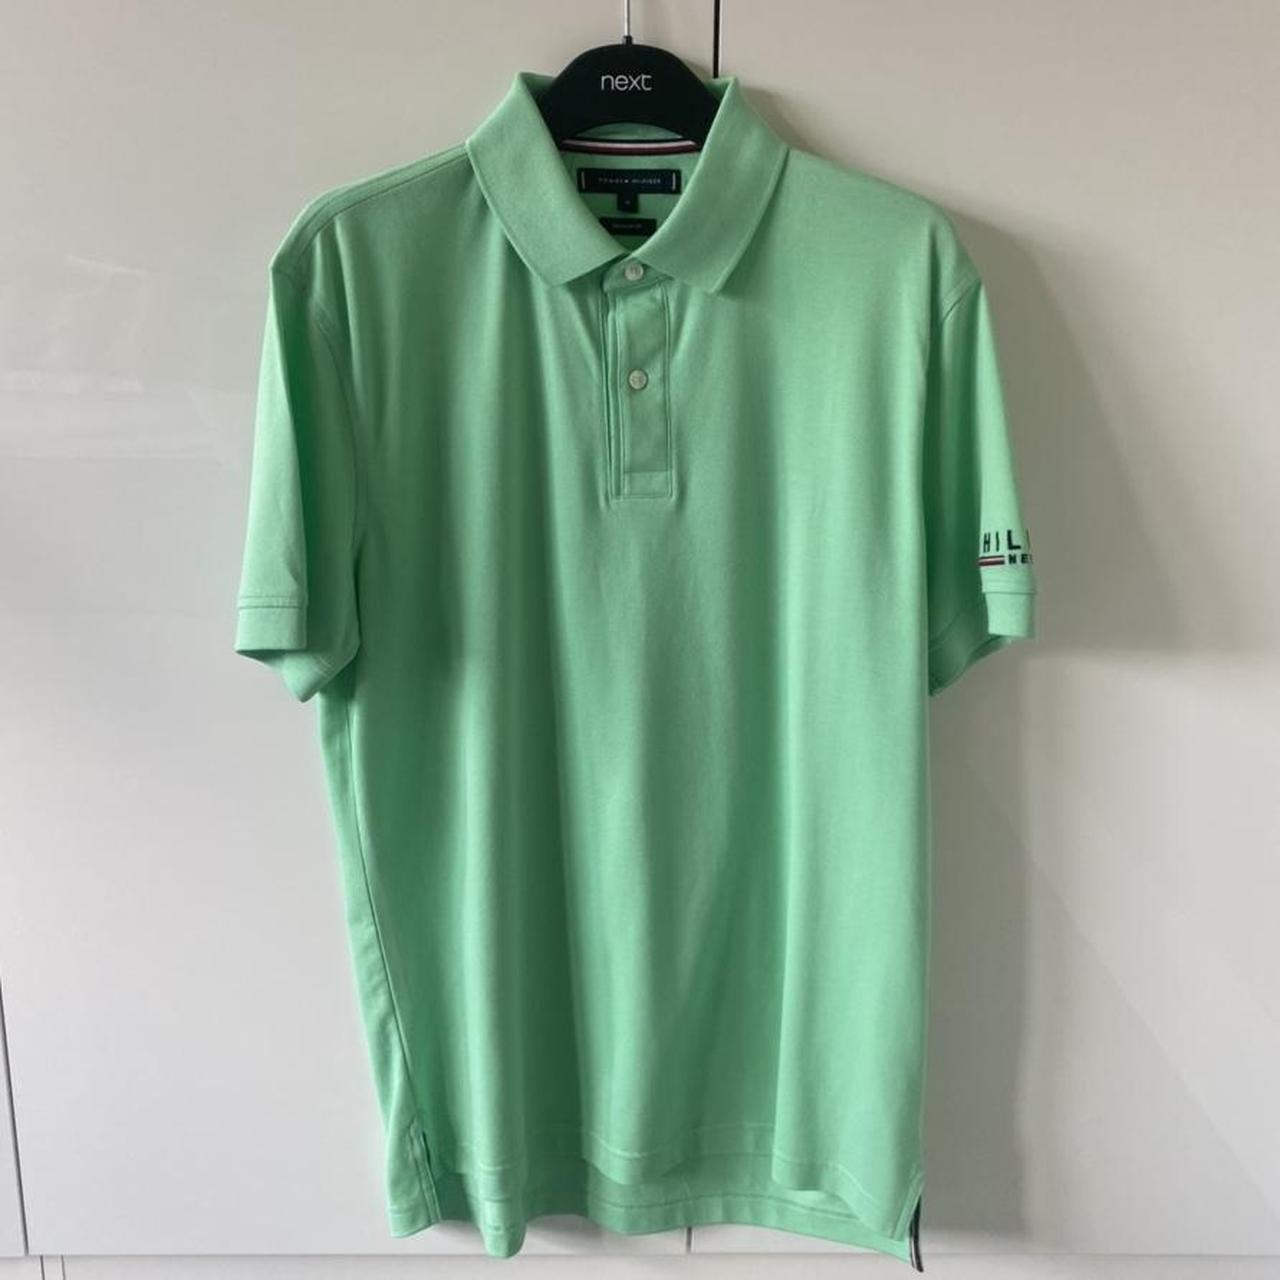 Tommy Hilfiger Men's Green and Black Polo-shirts | Depop